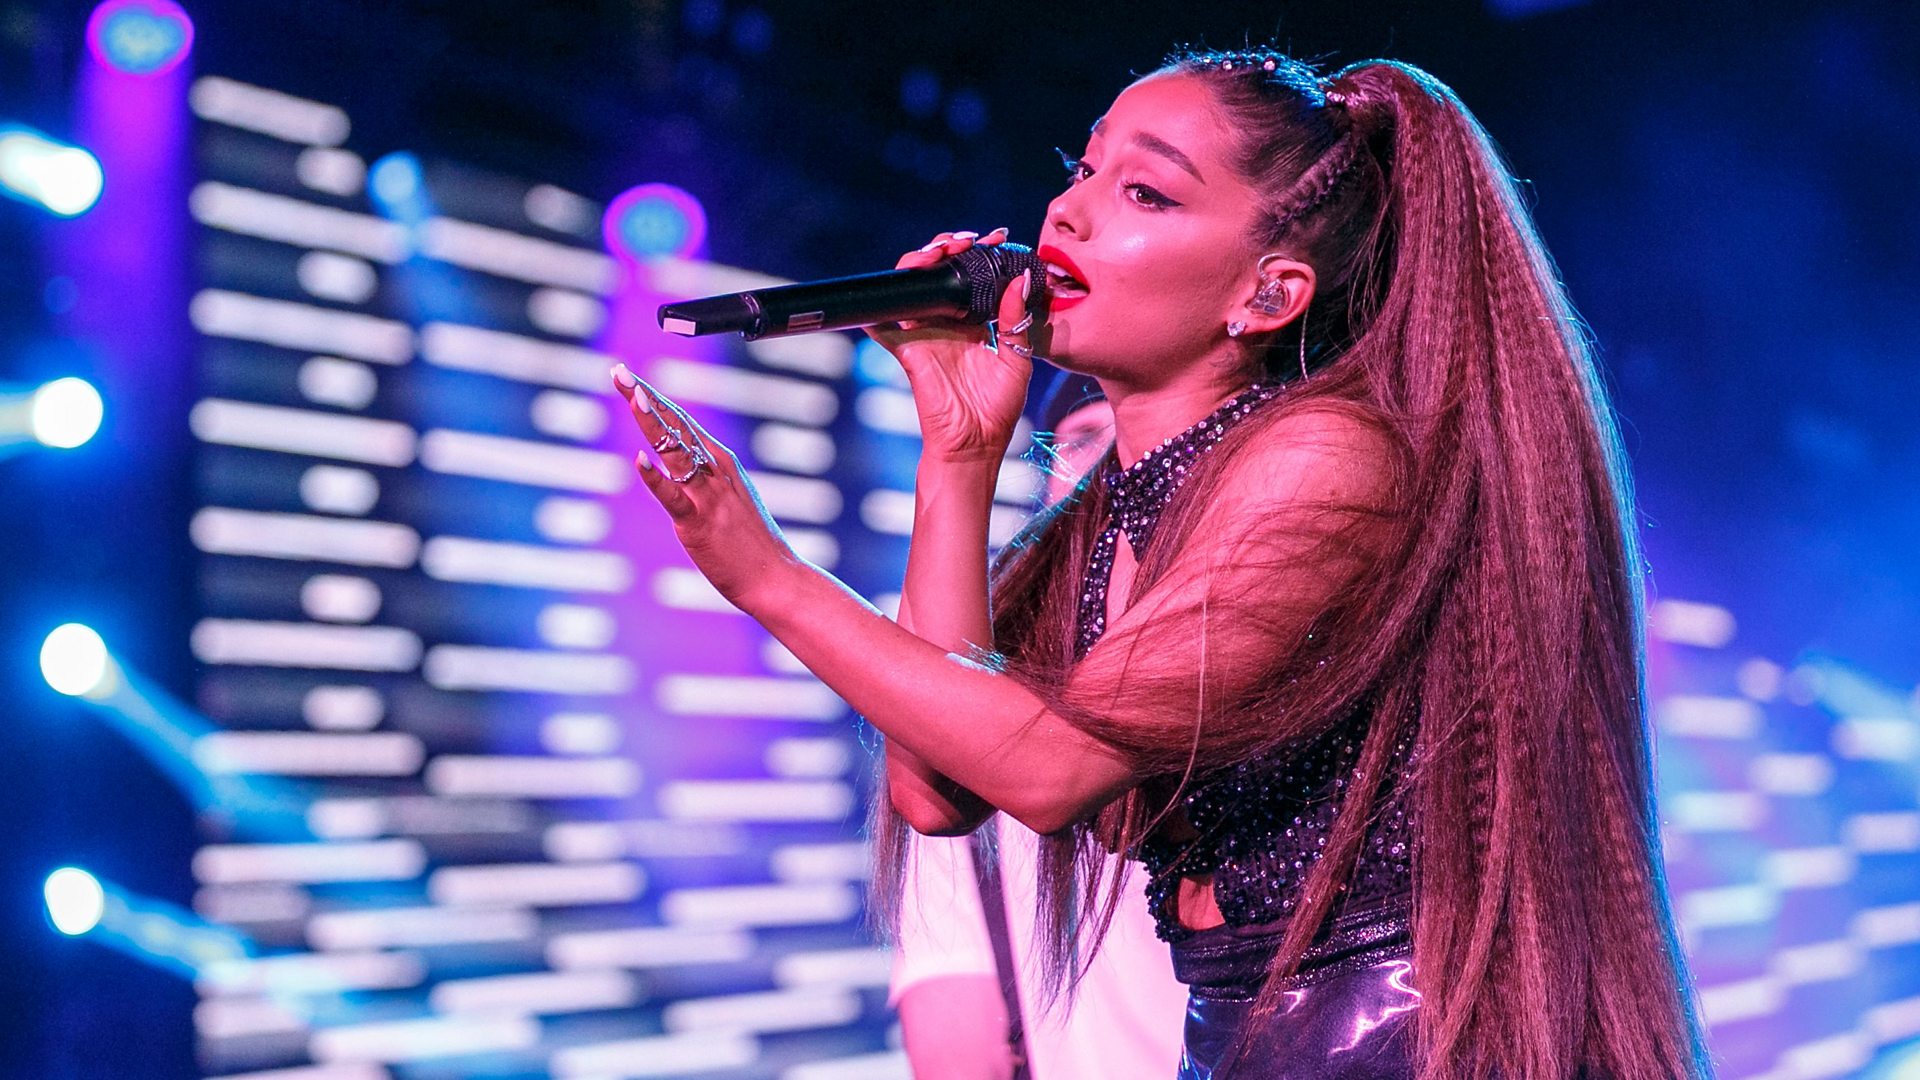 Ariana Grande Covers Whitney Houston's 'I Have Nothing' in Concert